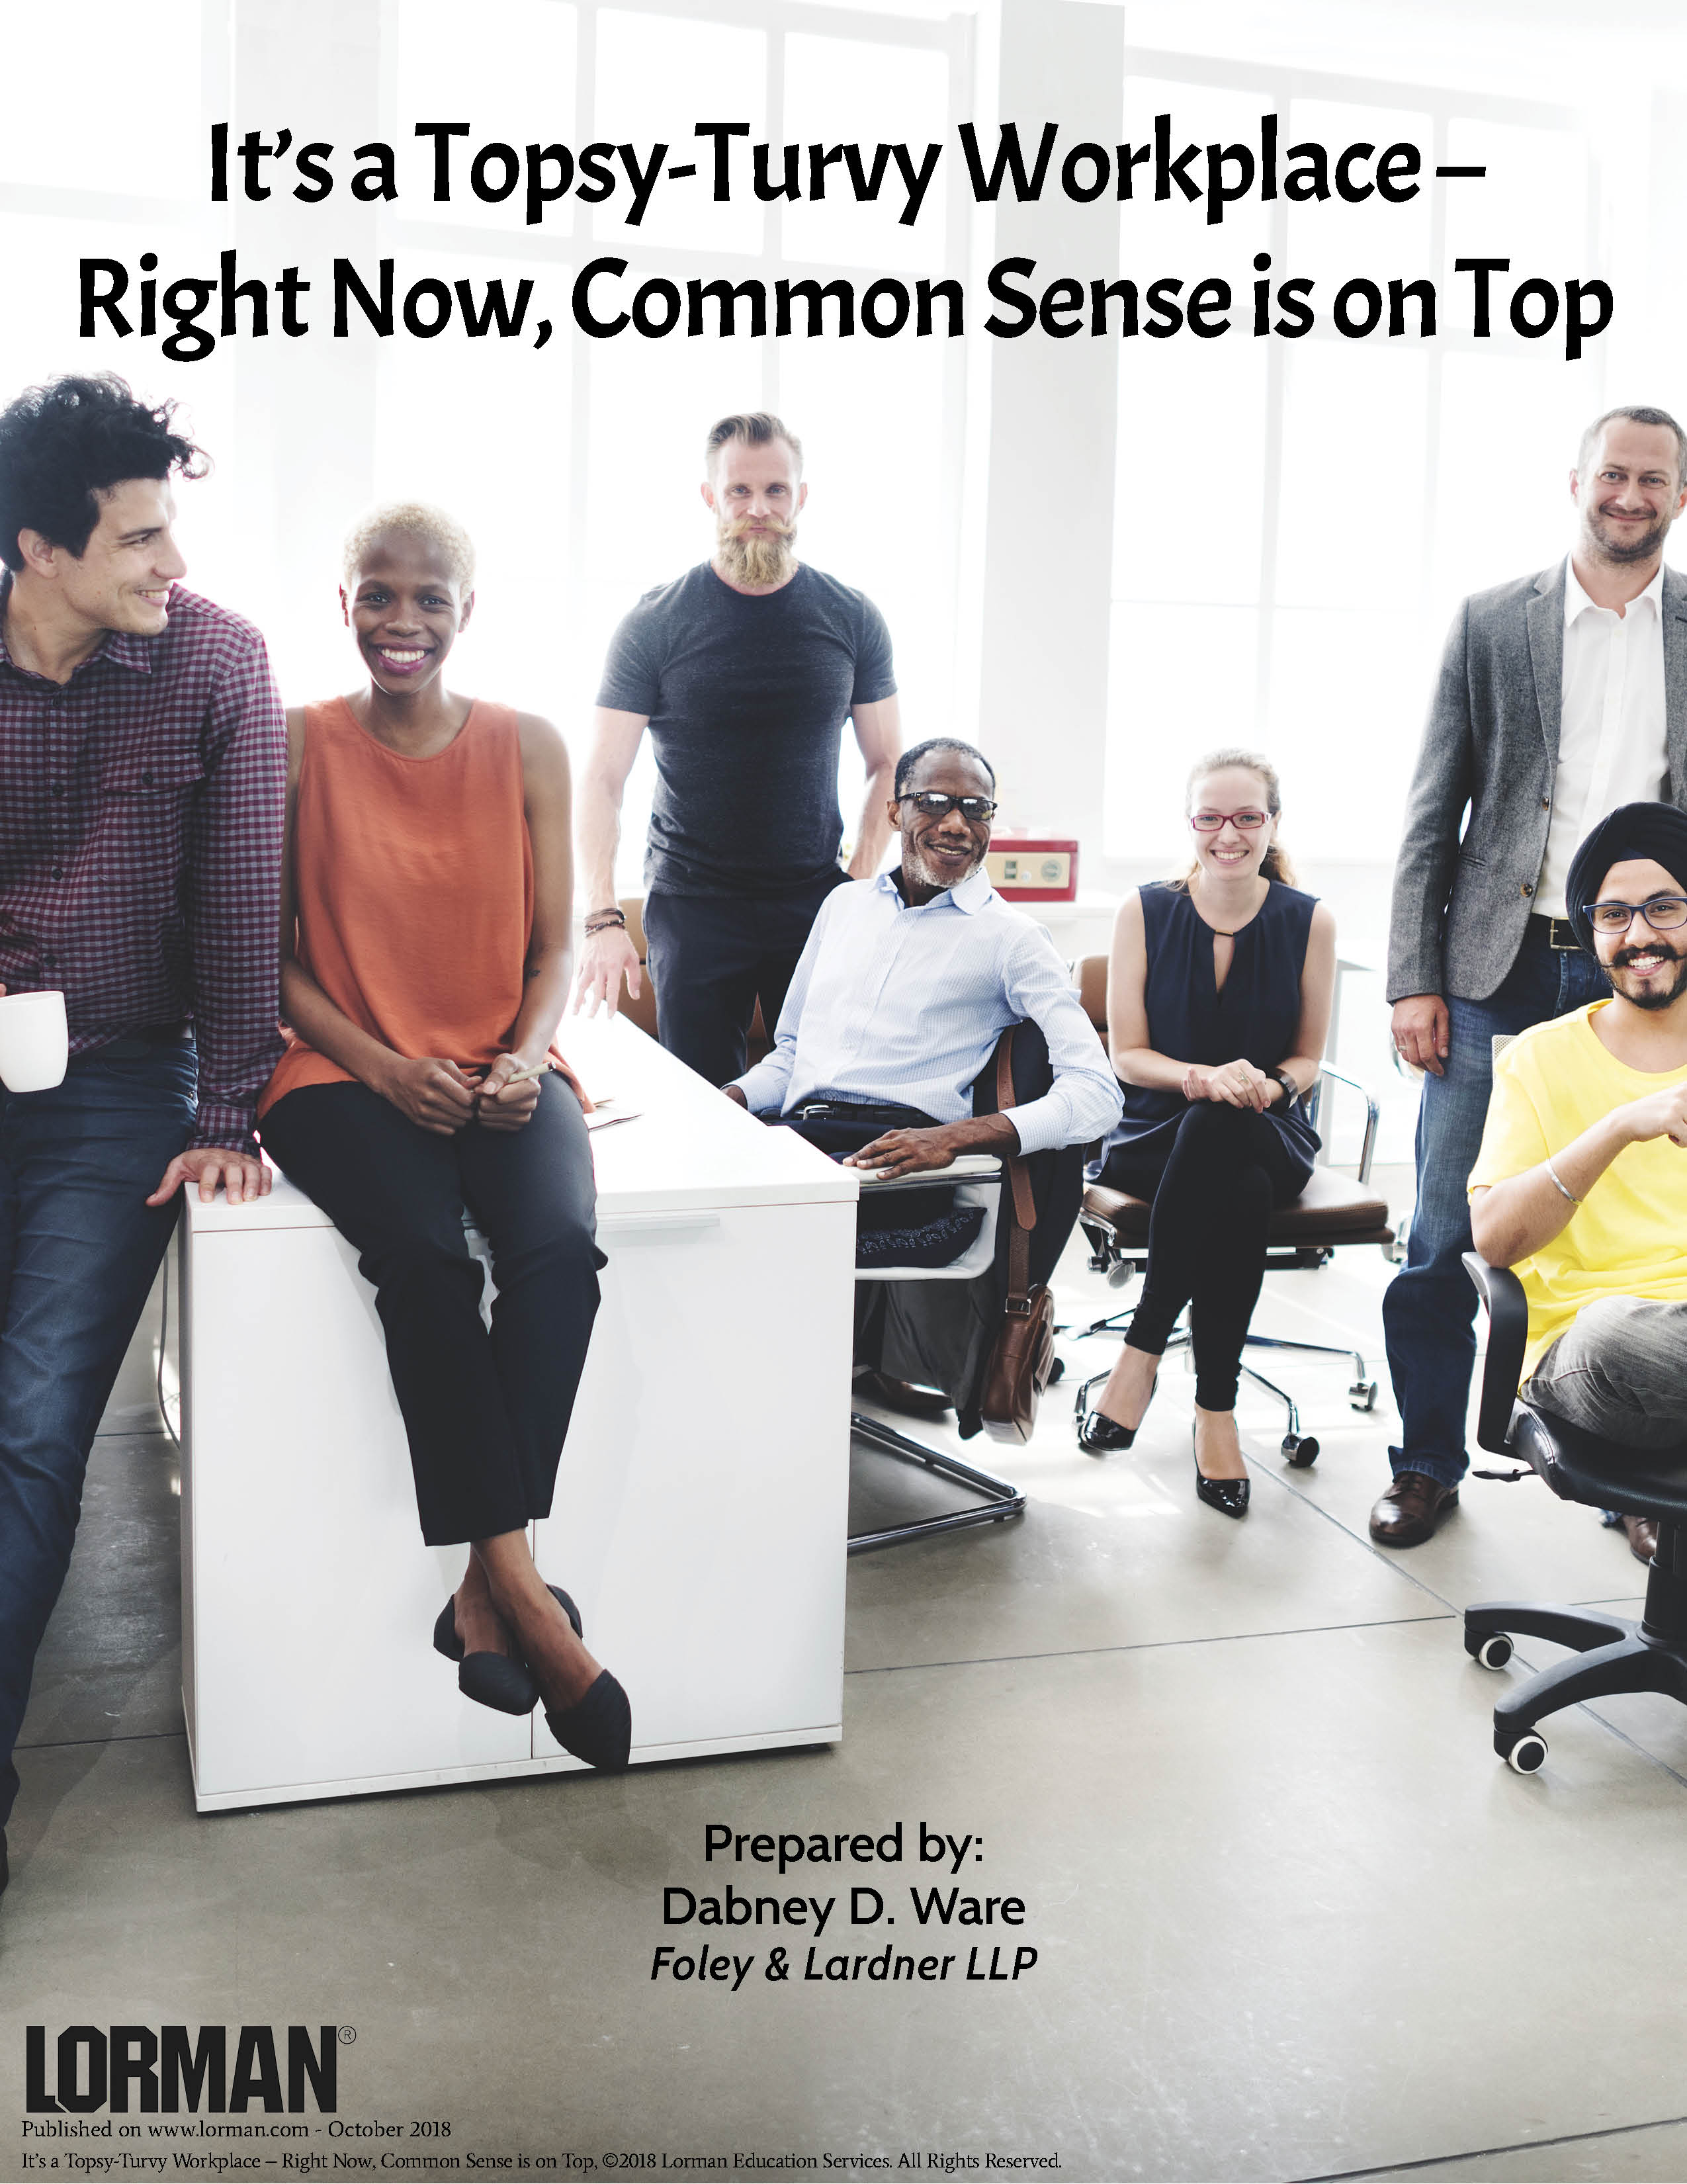 It’s a Topsy-Turvy Workplace – Right Now, Common Sense is on Top